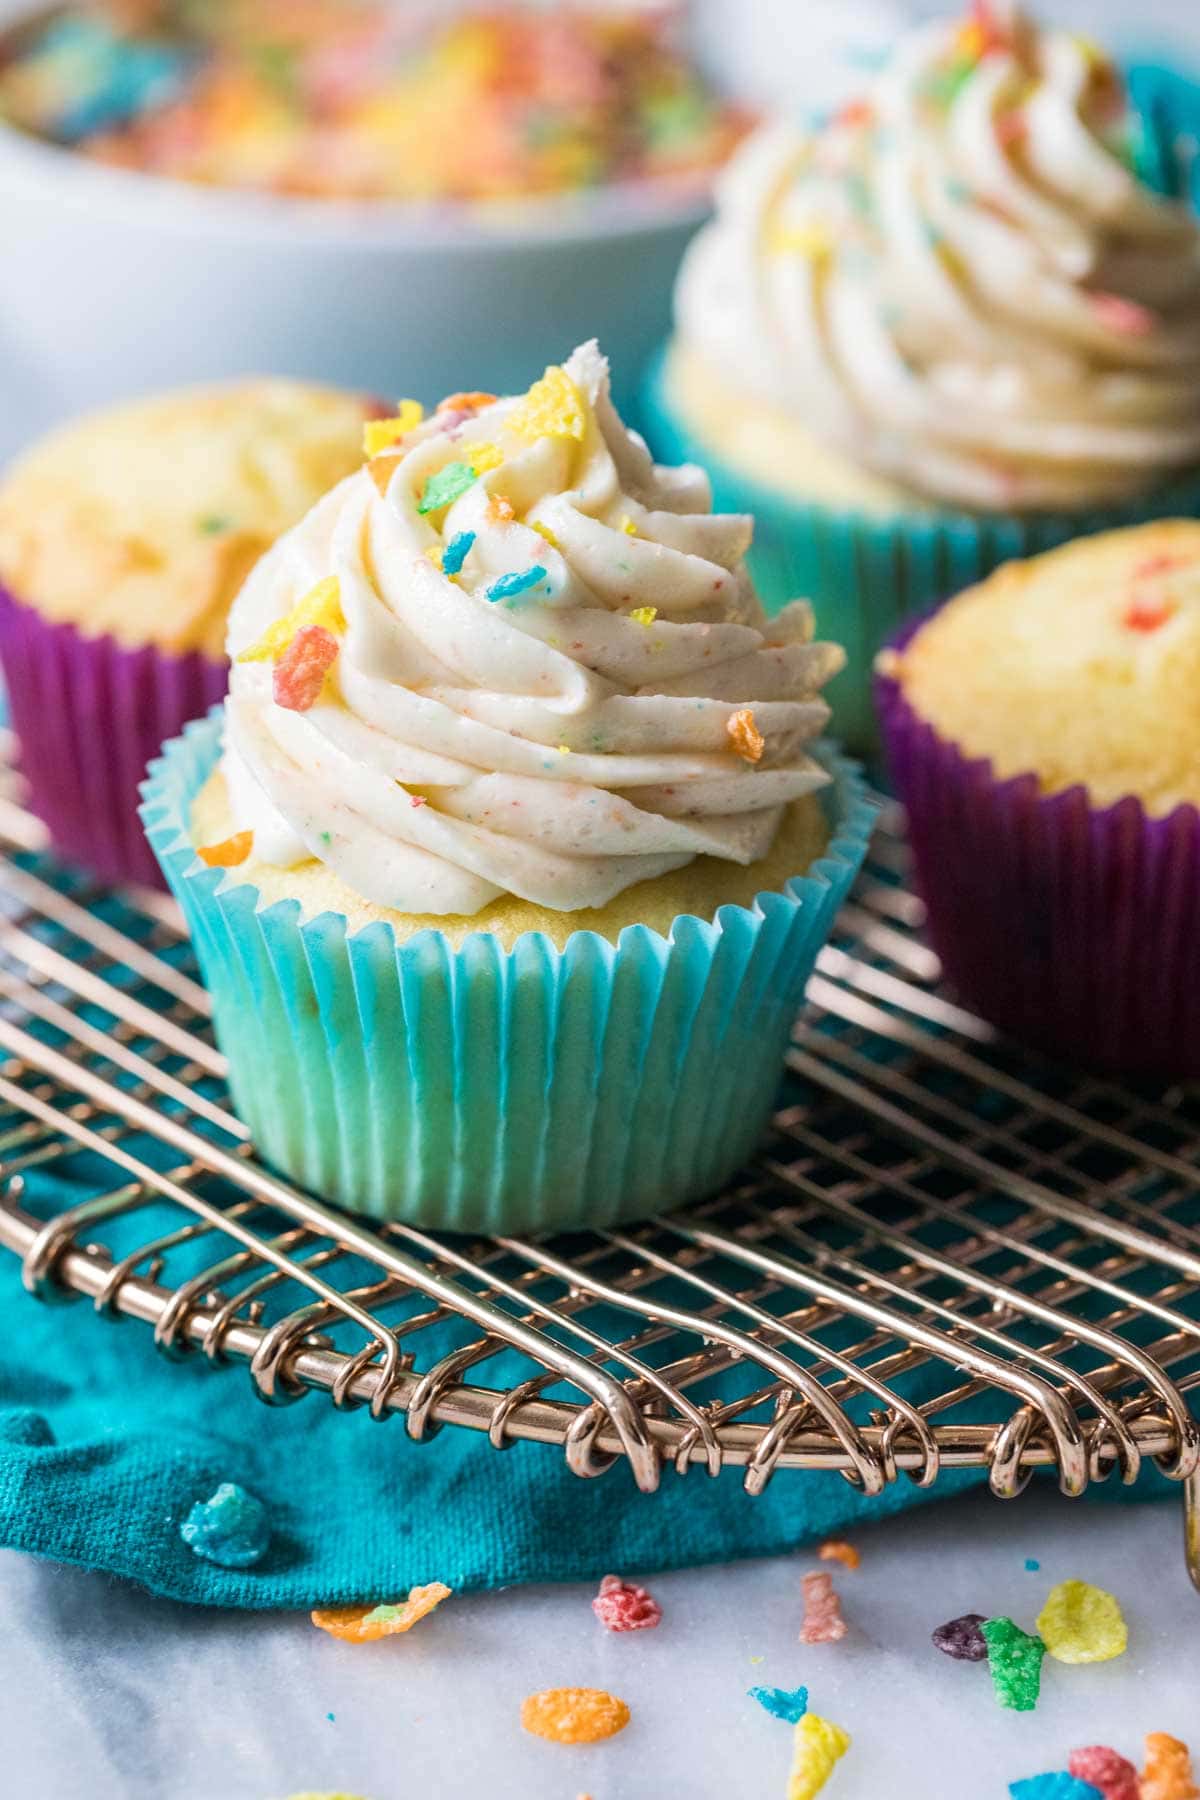 Vanilla cupcake frosted with a piped fruity pebbles frosting.